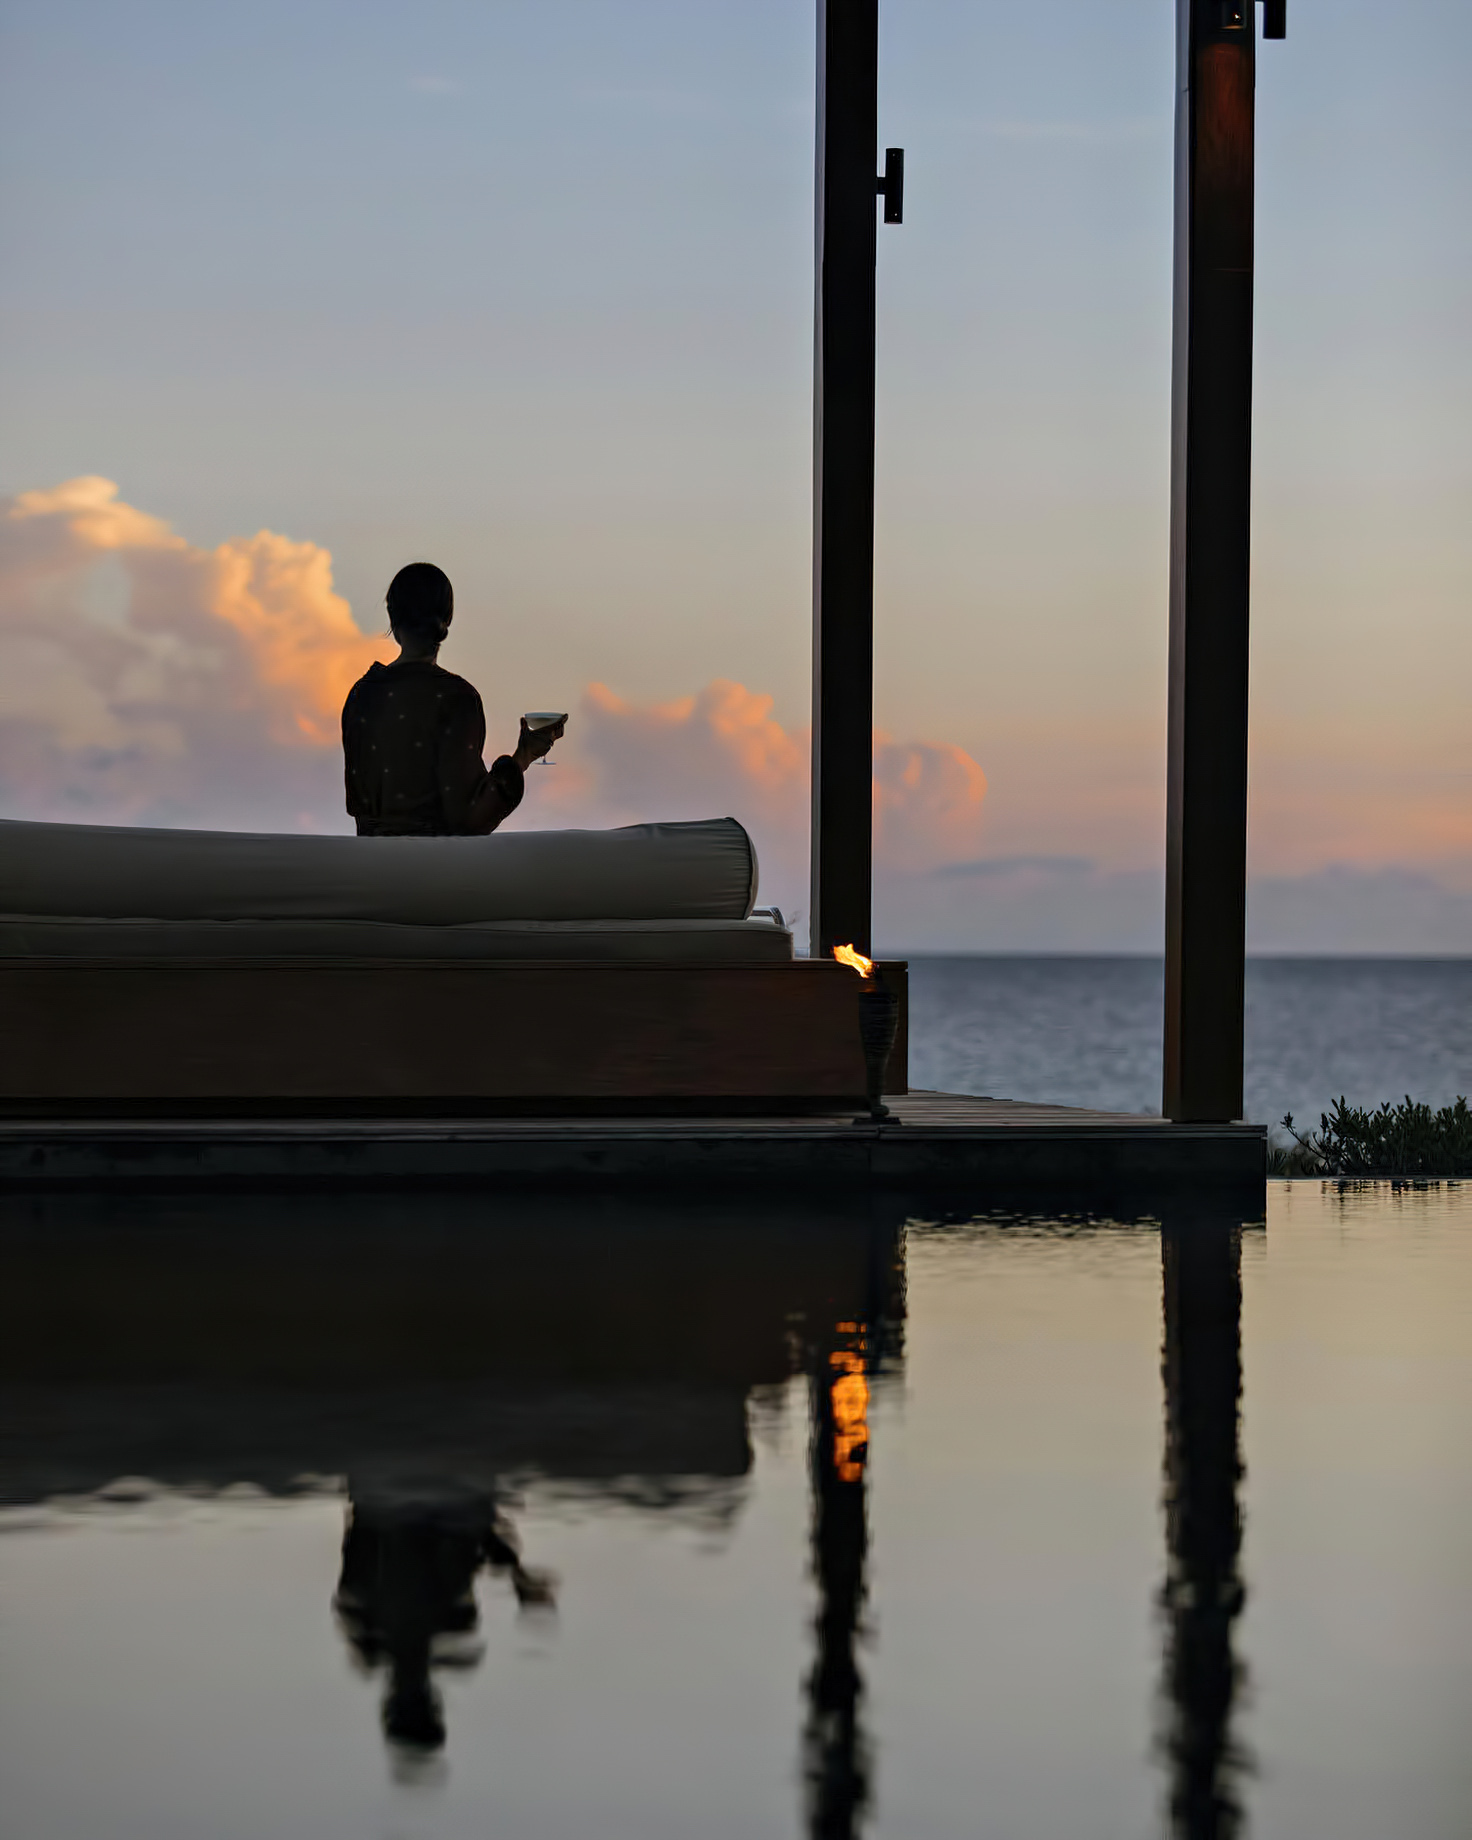 Amanyara Resort - Providenciales, Turks and Caicos Islands - Sunset Poolside Relaxation